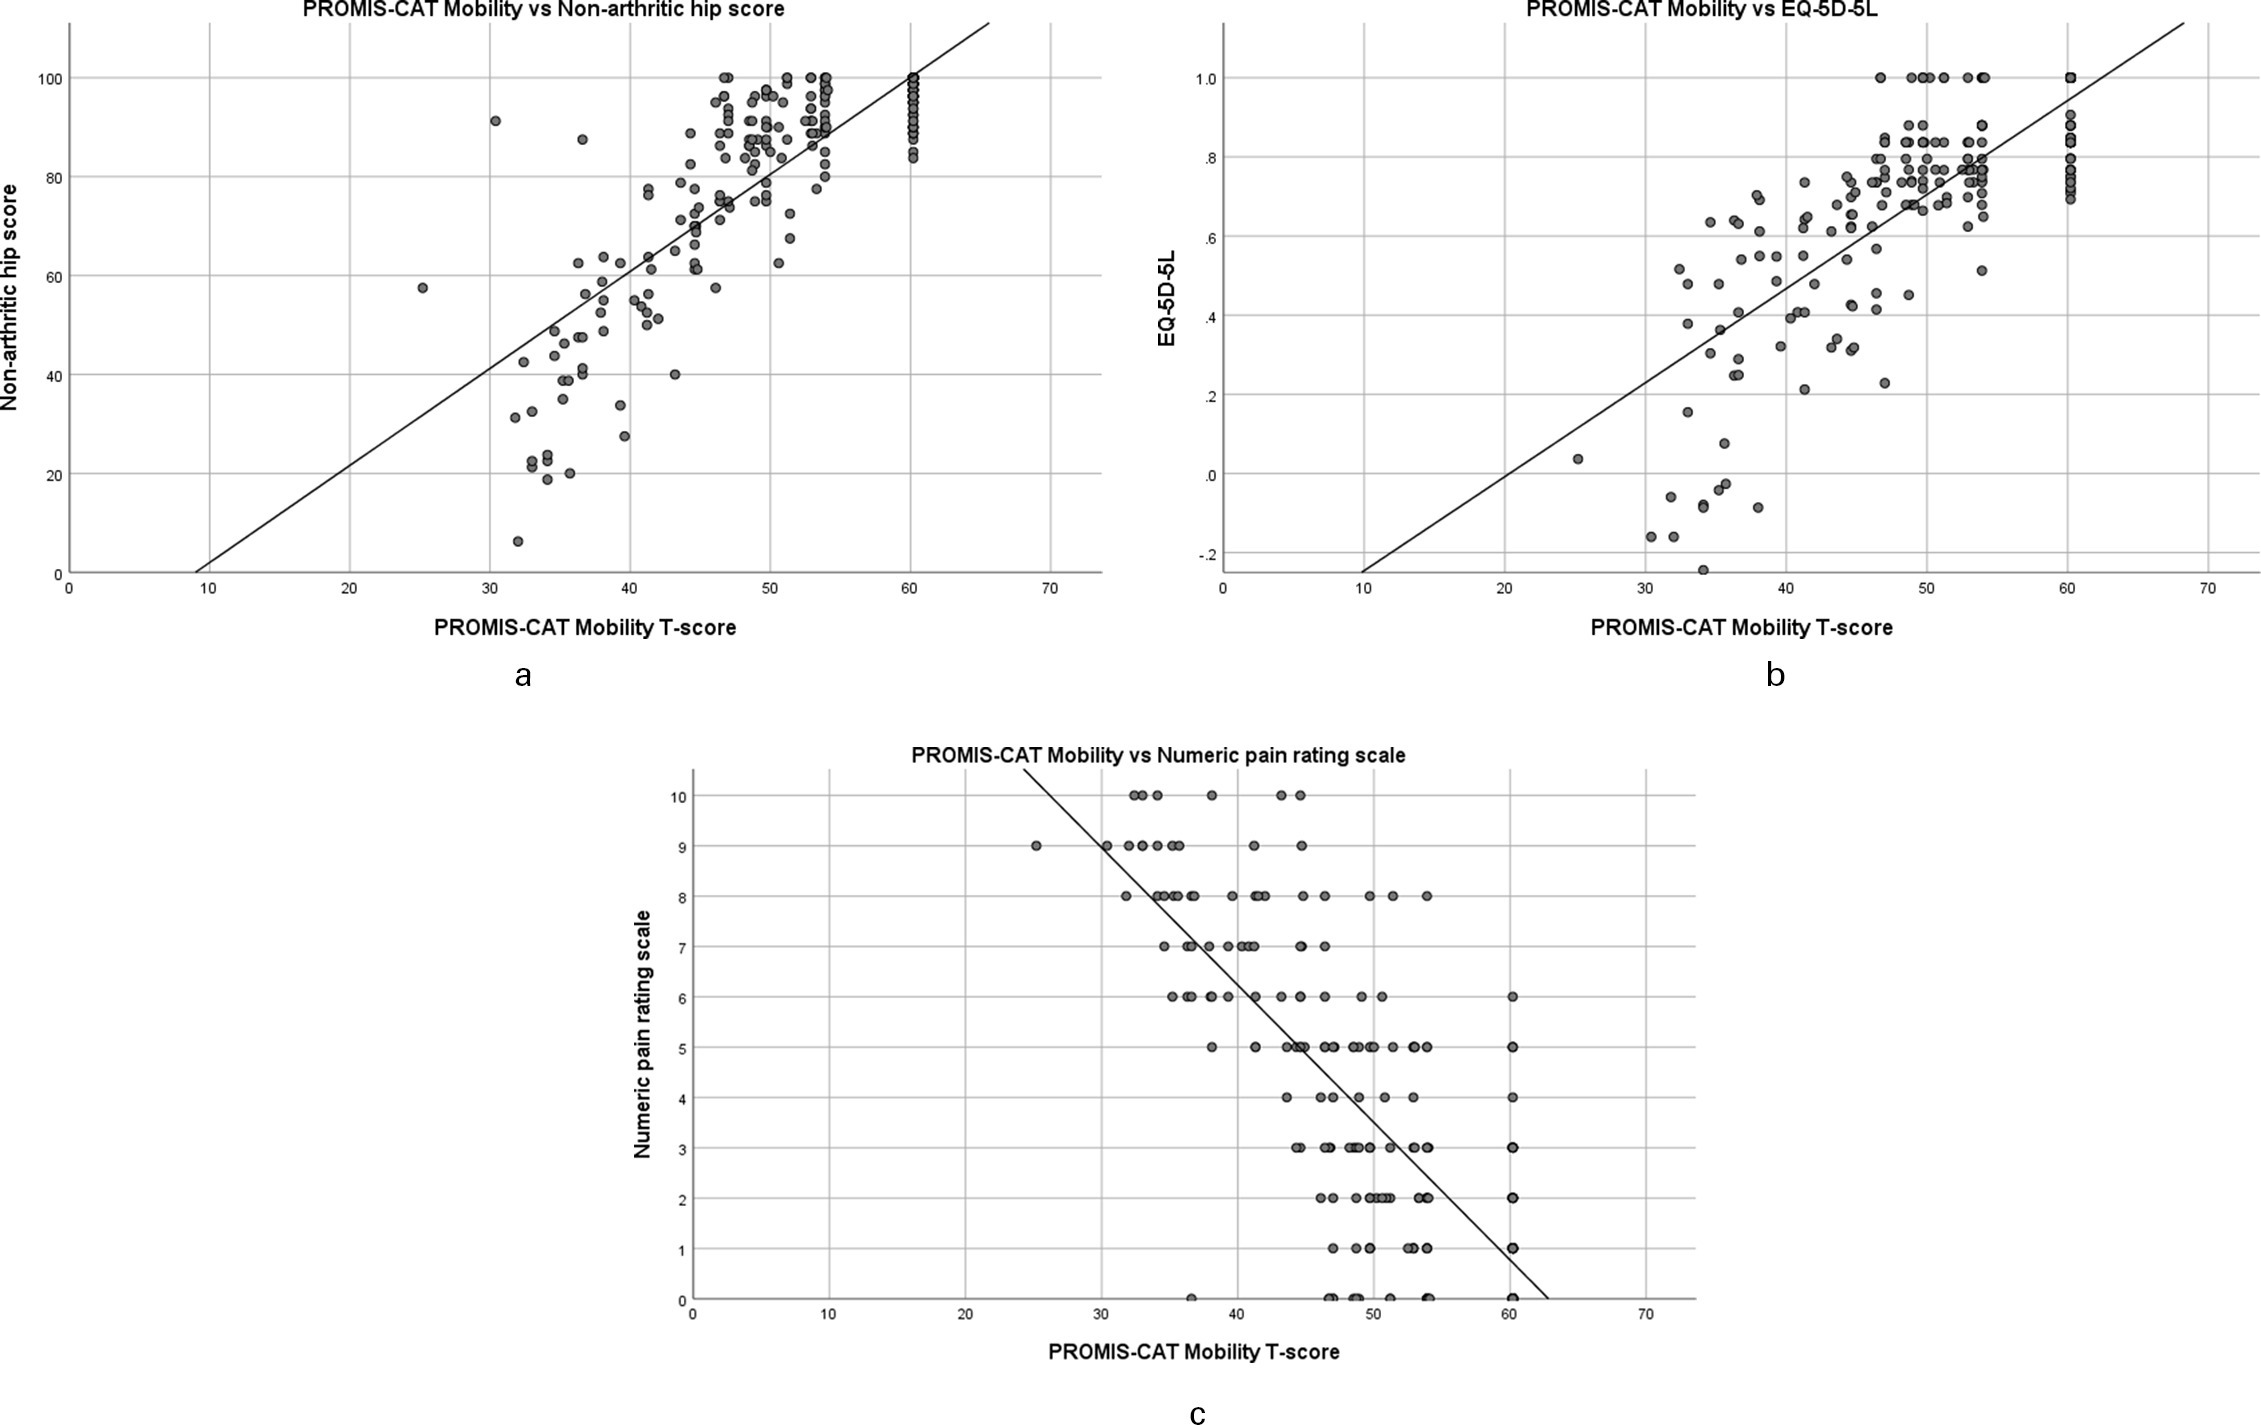 Fig. 1 
          a) Scatter plot of Patient-Reported Outcomes Measurement Information System computer adaptive test (PROMIS-CAT) Mobility score versus Non-Arthritic Hip Score. b) Scatter plot of PROMIS-CAT Mobility versus EuroQol five-dimension five-level. c) Scatter plot of PROMIS-CAT Mobility versus Numeric Pain Rating Scale.
        